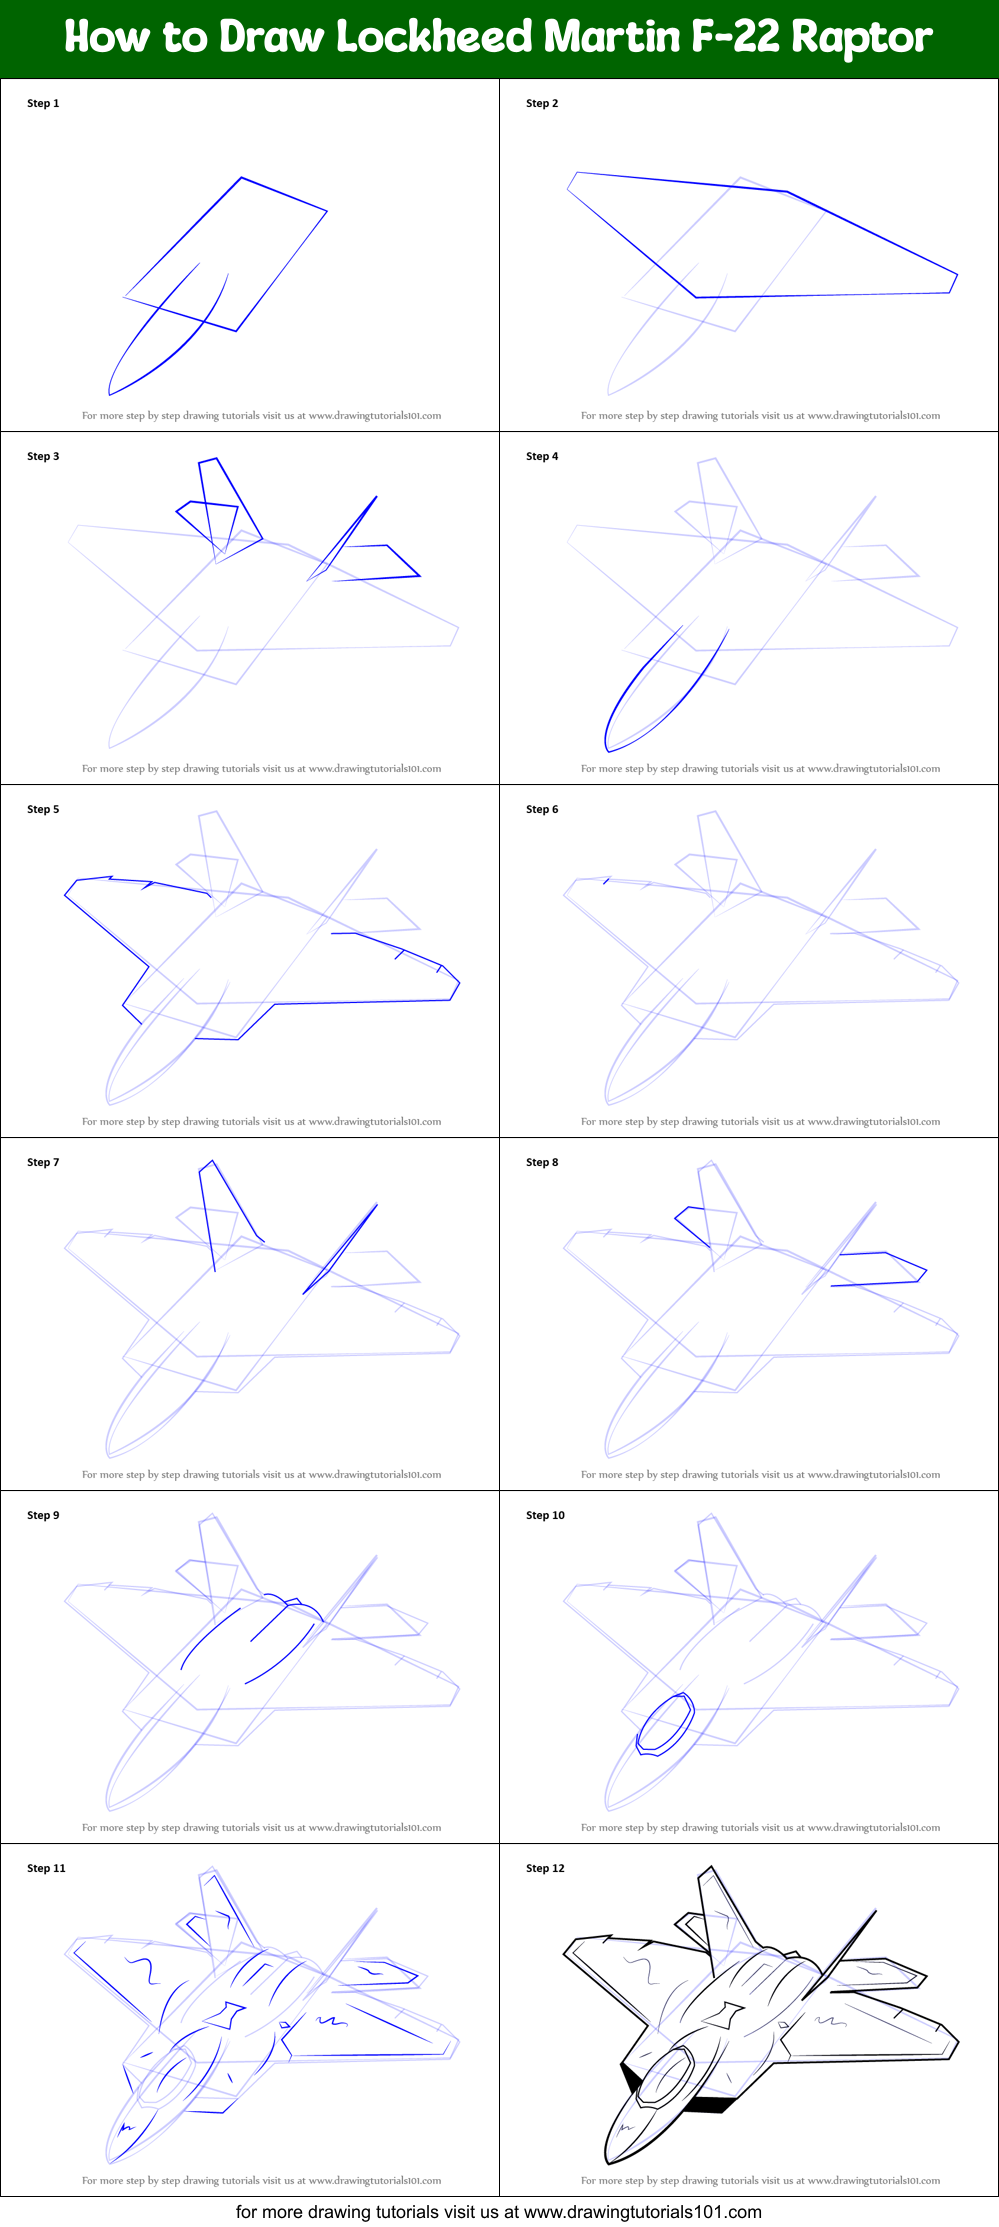 How to Draw Lockheed Martin F22 Raptor printable step by step drawing